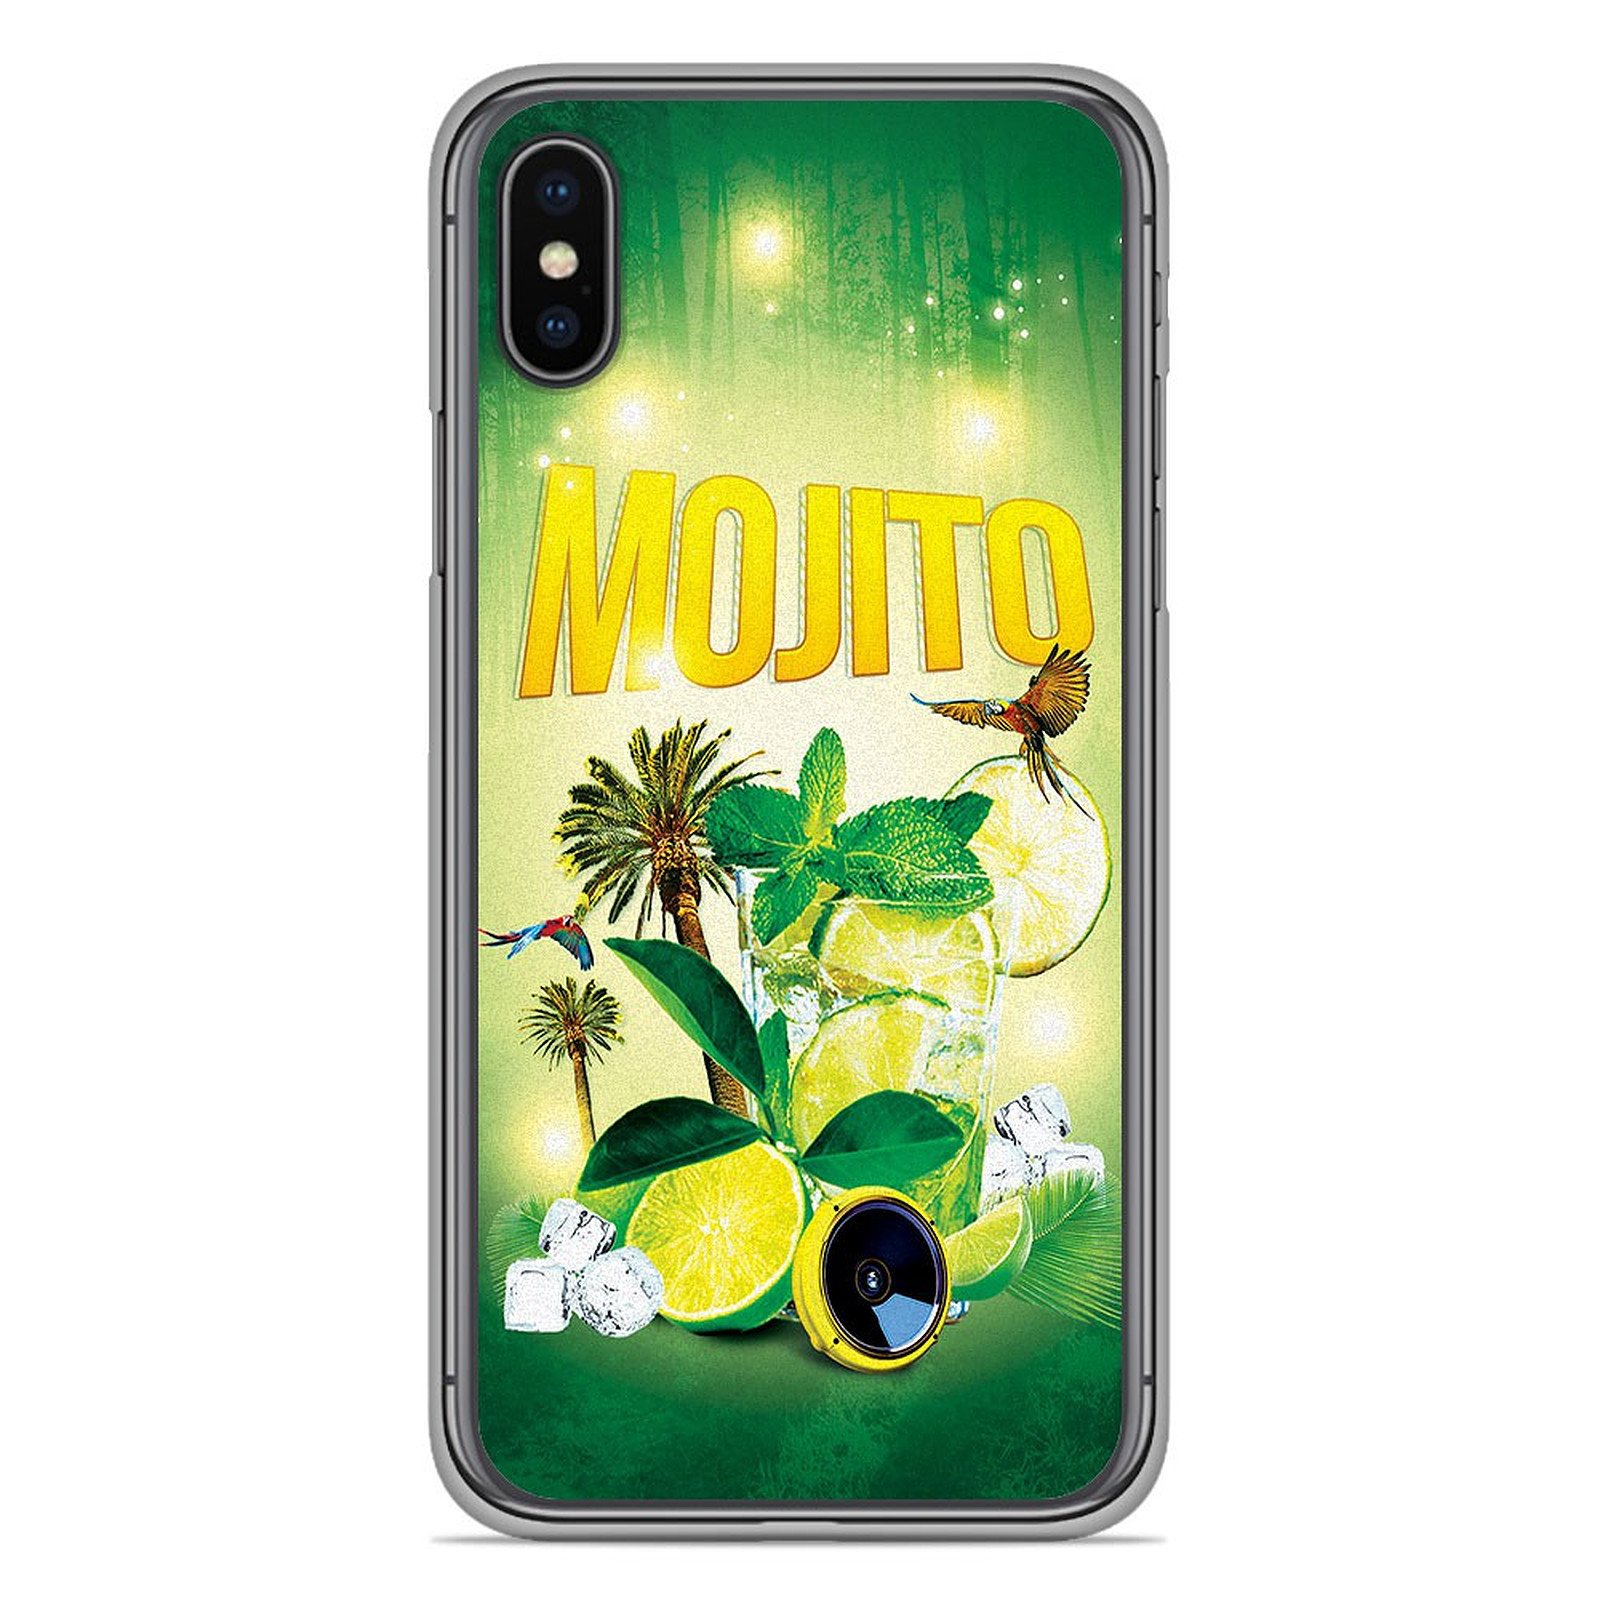 1001 Coques Coque silicone gel Apple iPhone XS Max motif Mojito Foret - Coque telephone 1001Coques